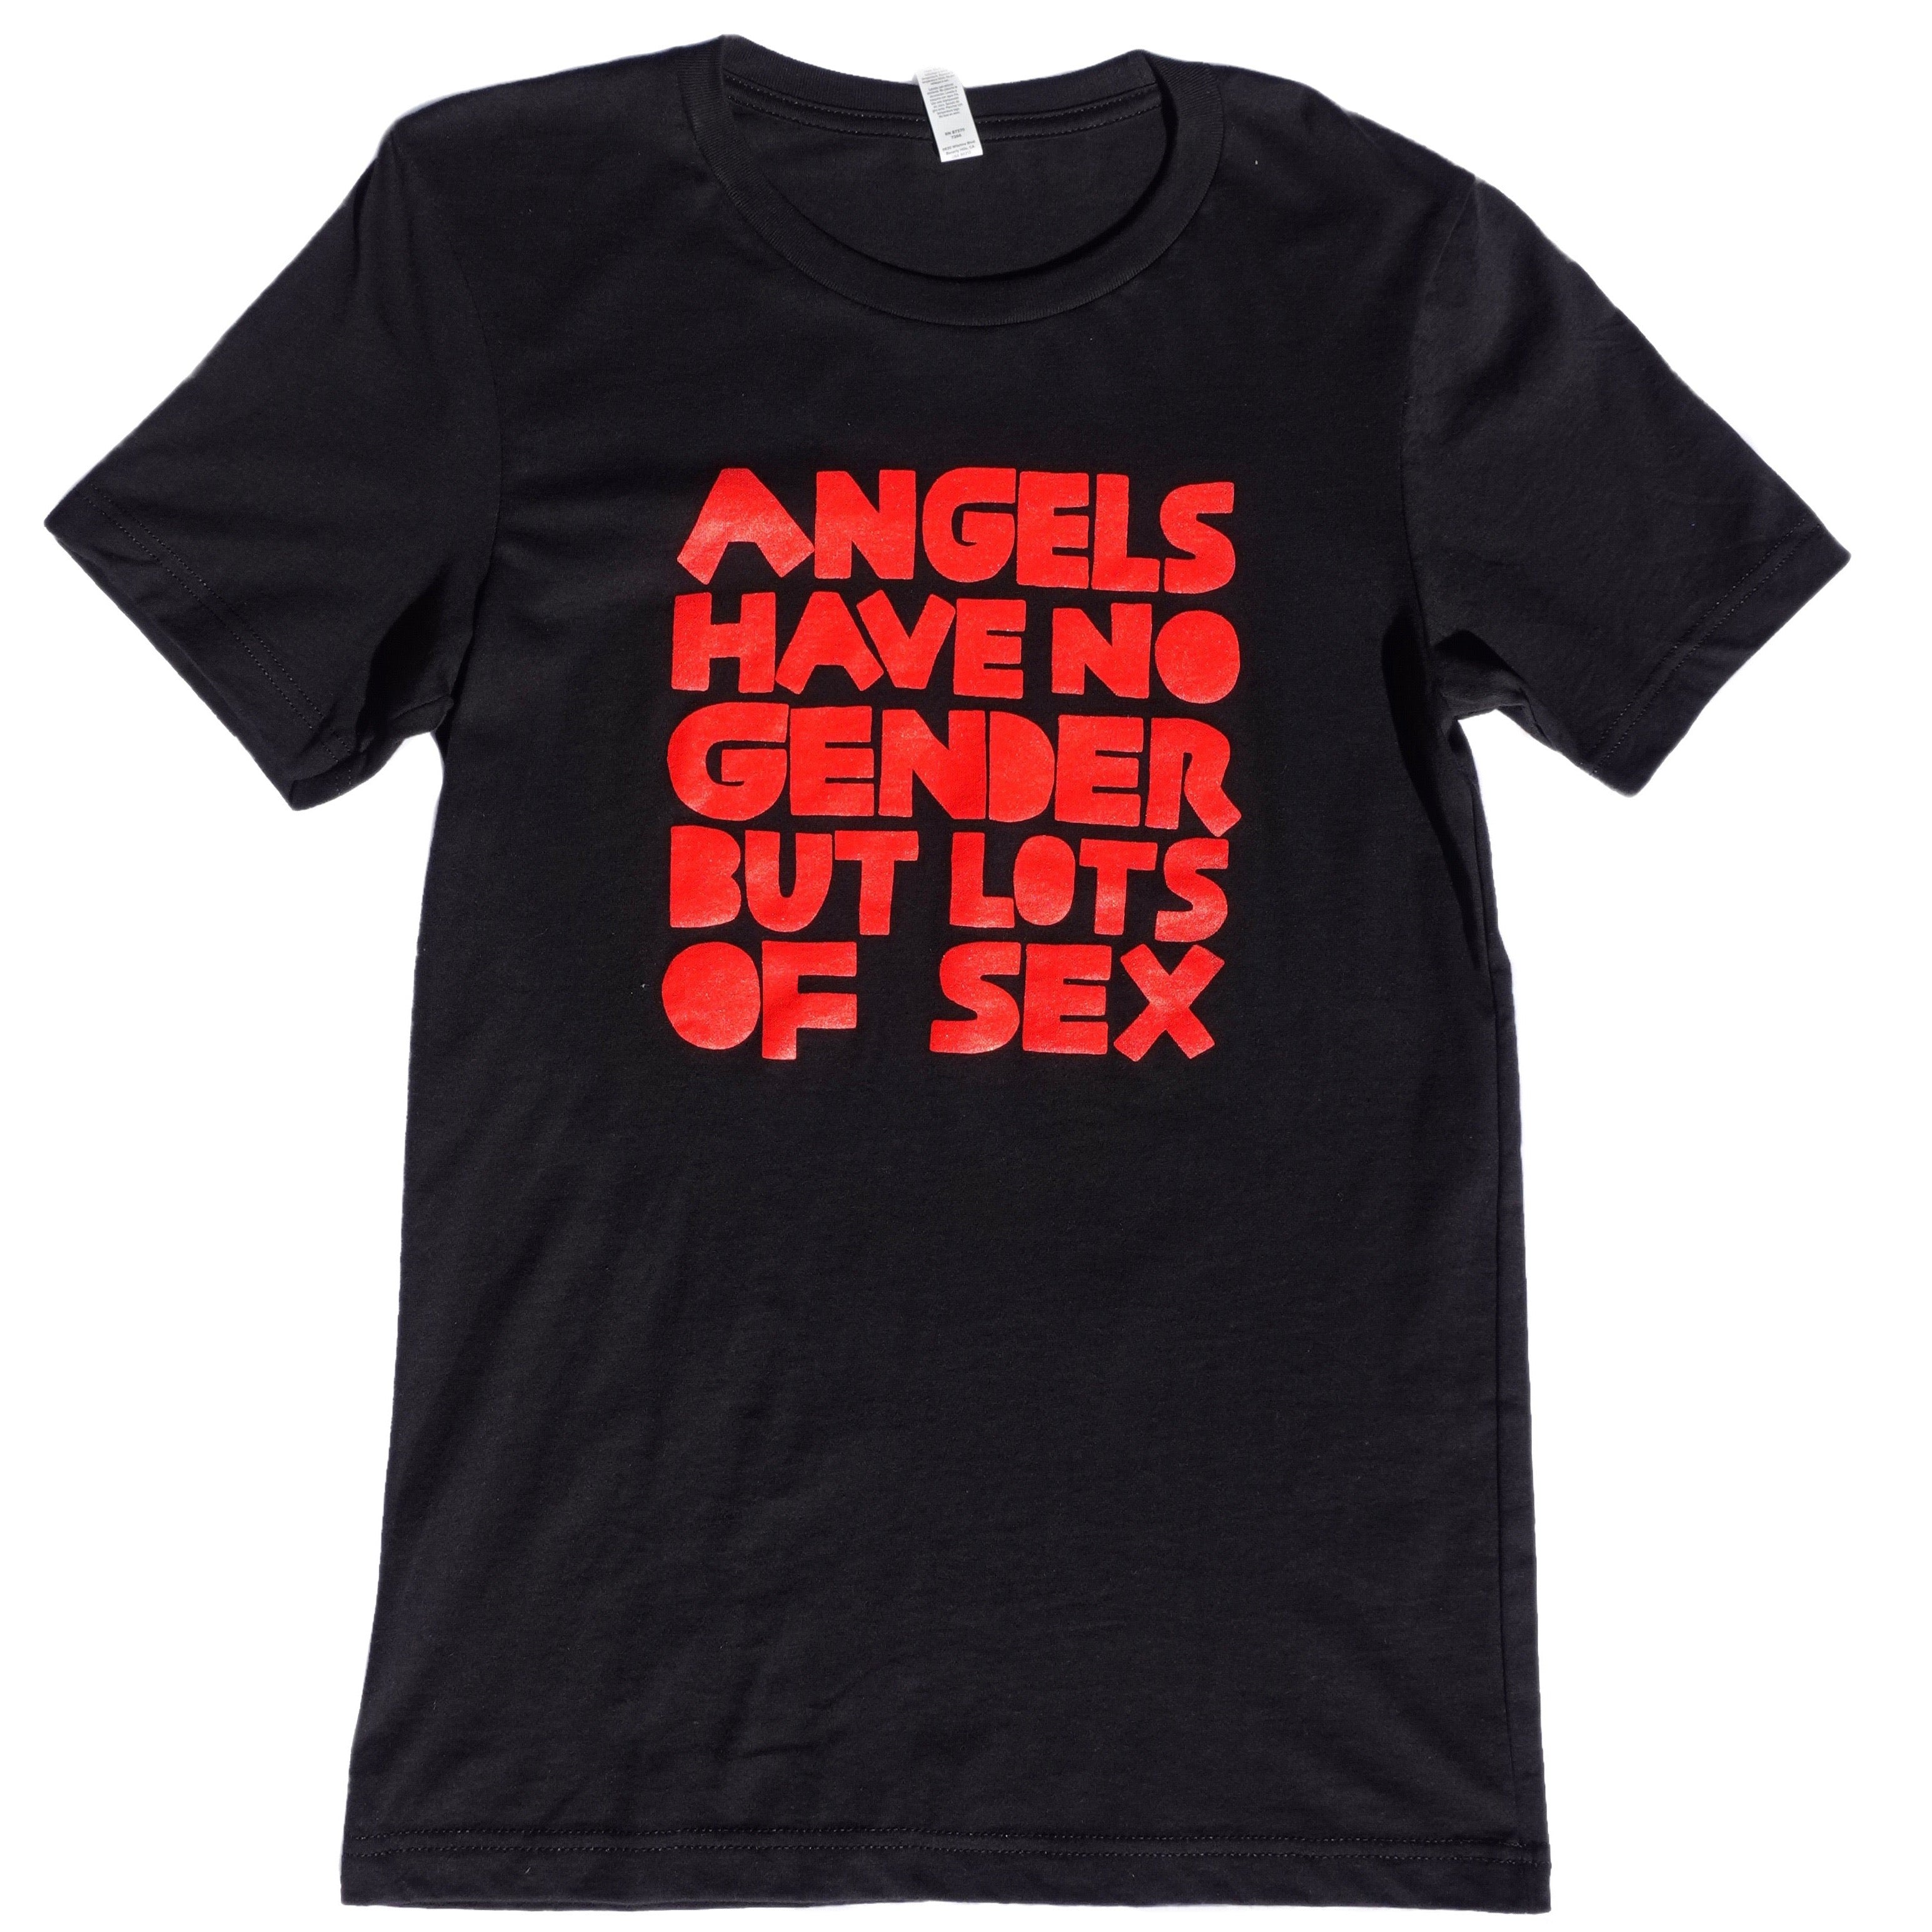 ANGELS HAVE NO GENDER BUT LOTS OF SEX drawn tank top – OFFICIAL REBRAND